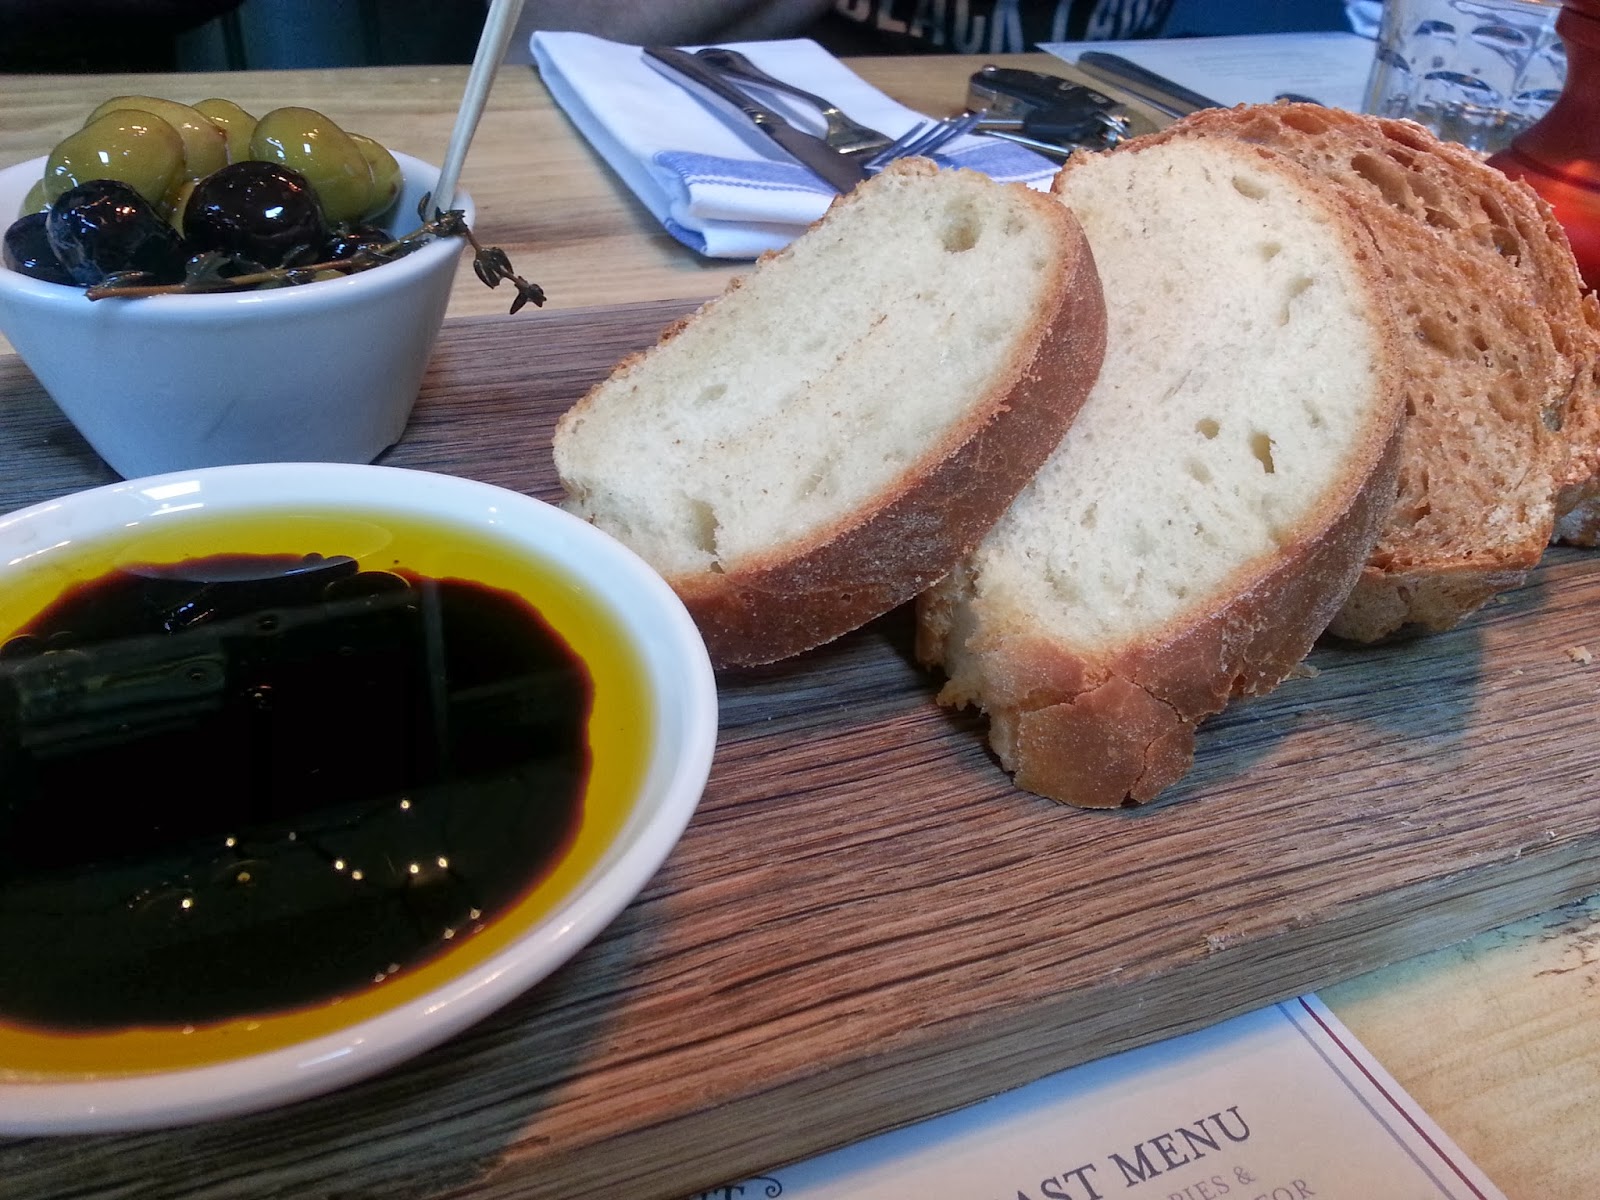 Bread and olives with balsamic and olive oil dip